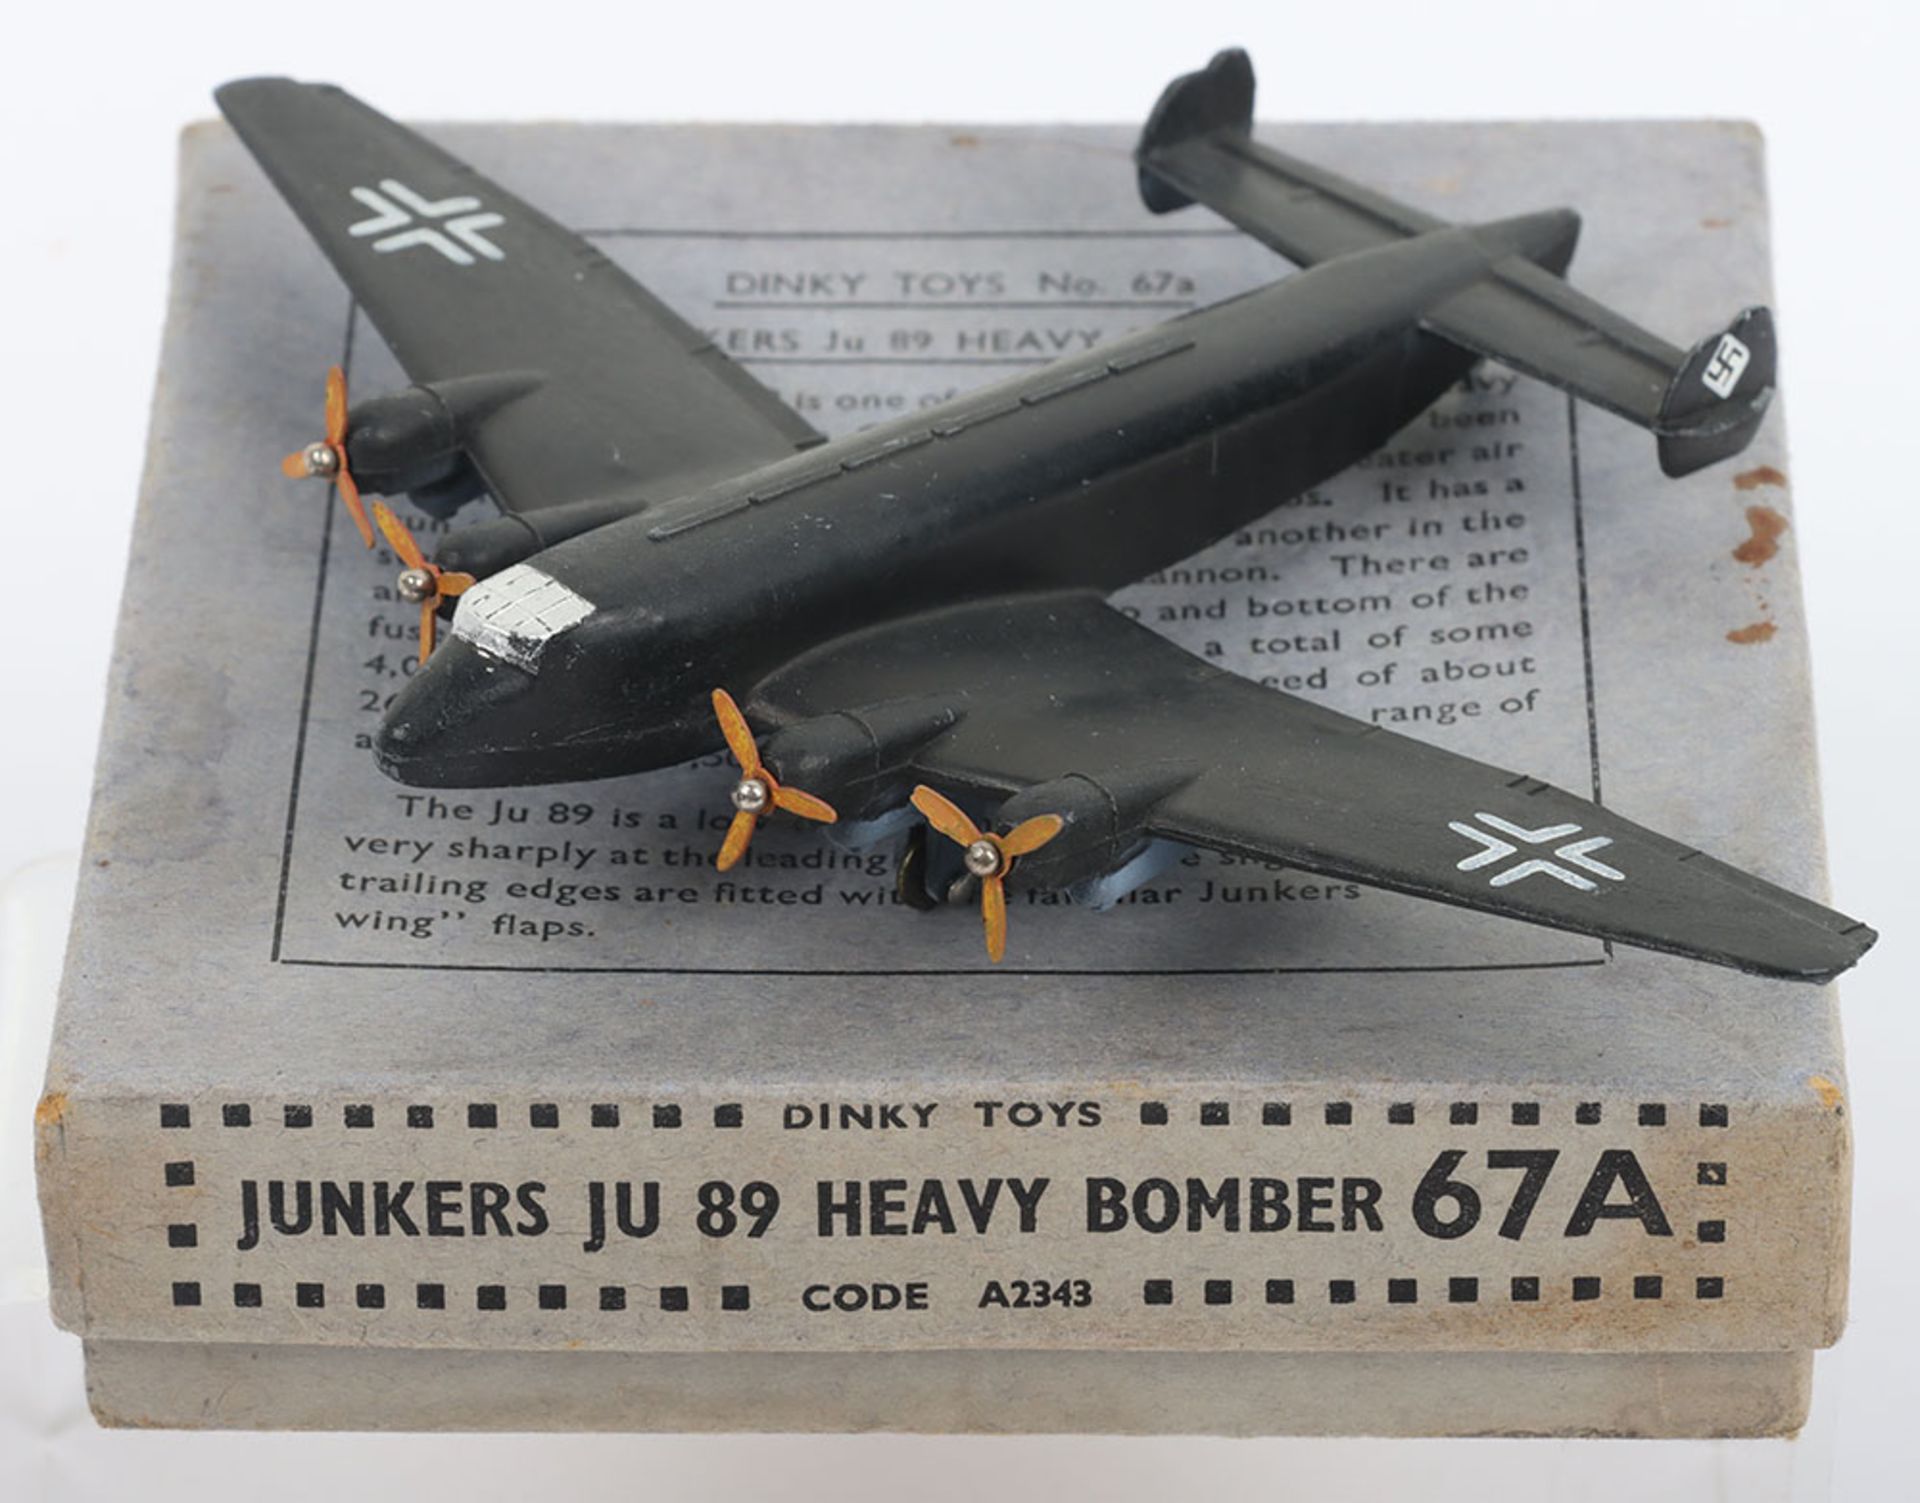 Dinky Toys 67A Junkers JU 89 Heavy Bomber - Image 3 of 6